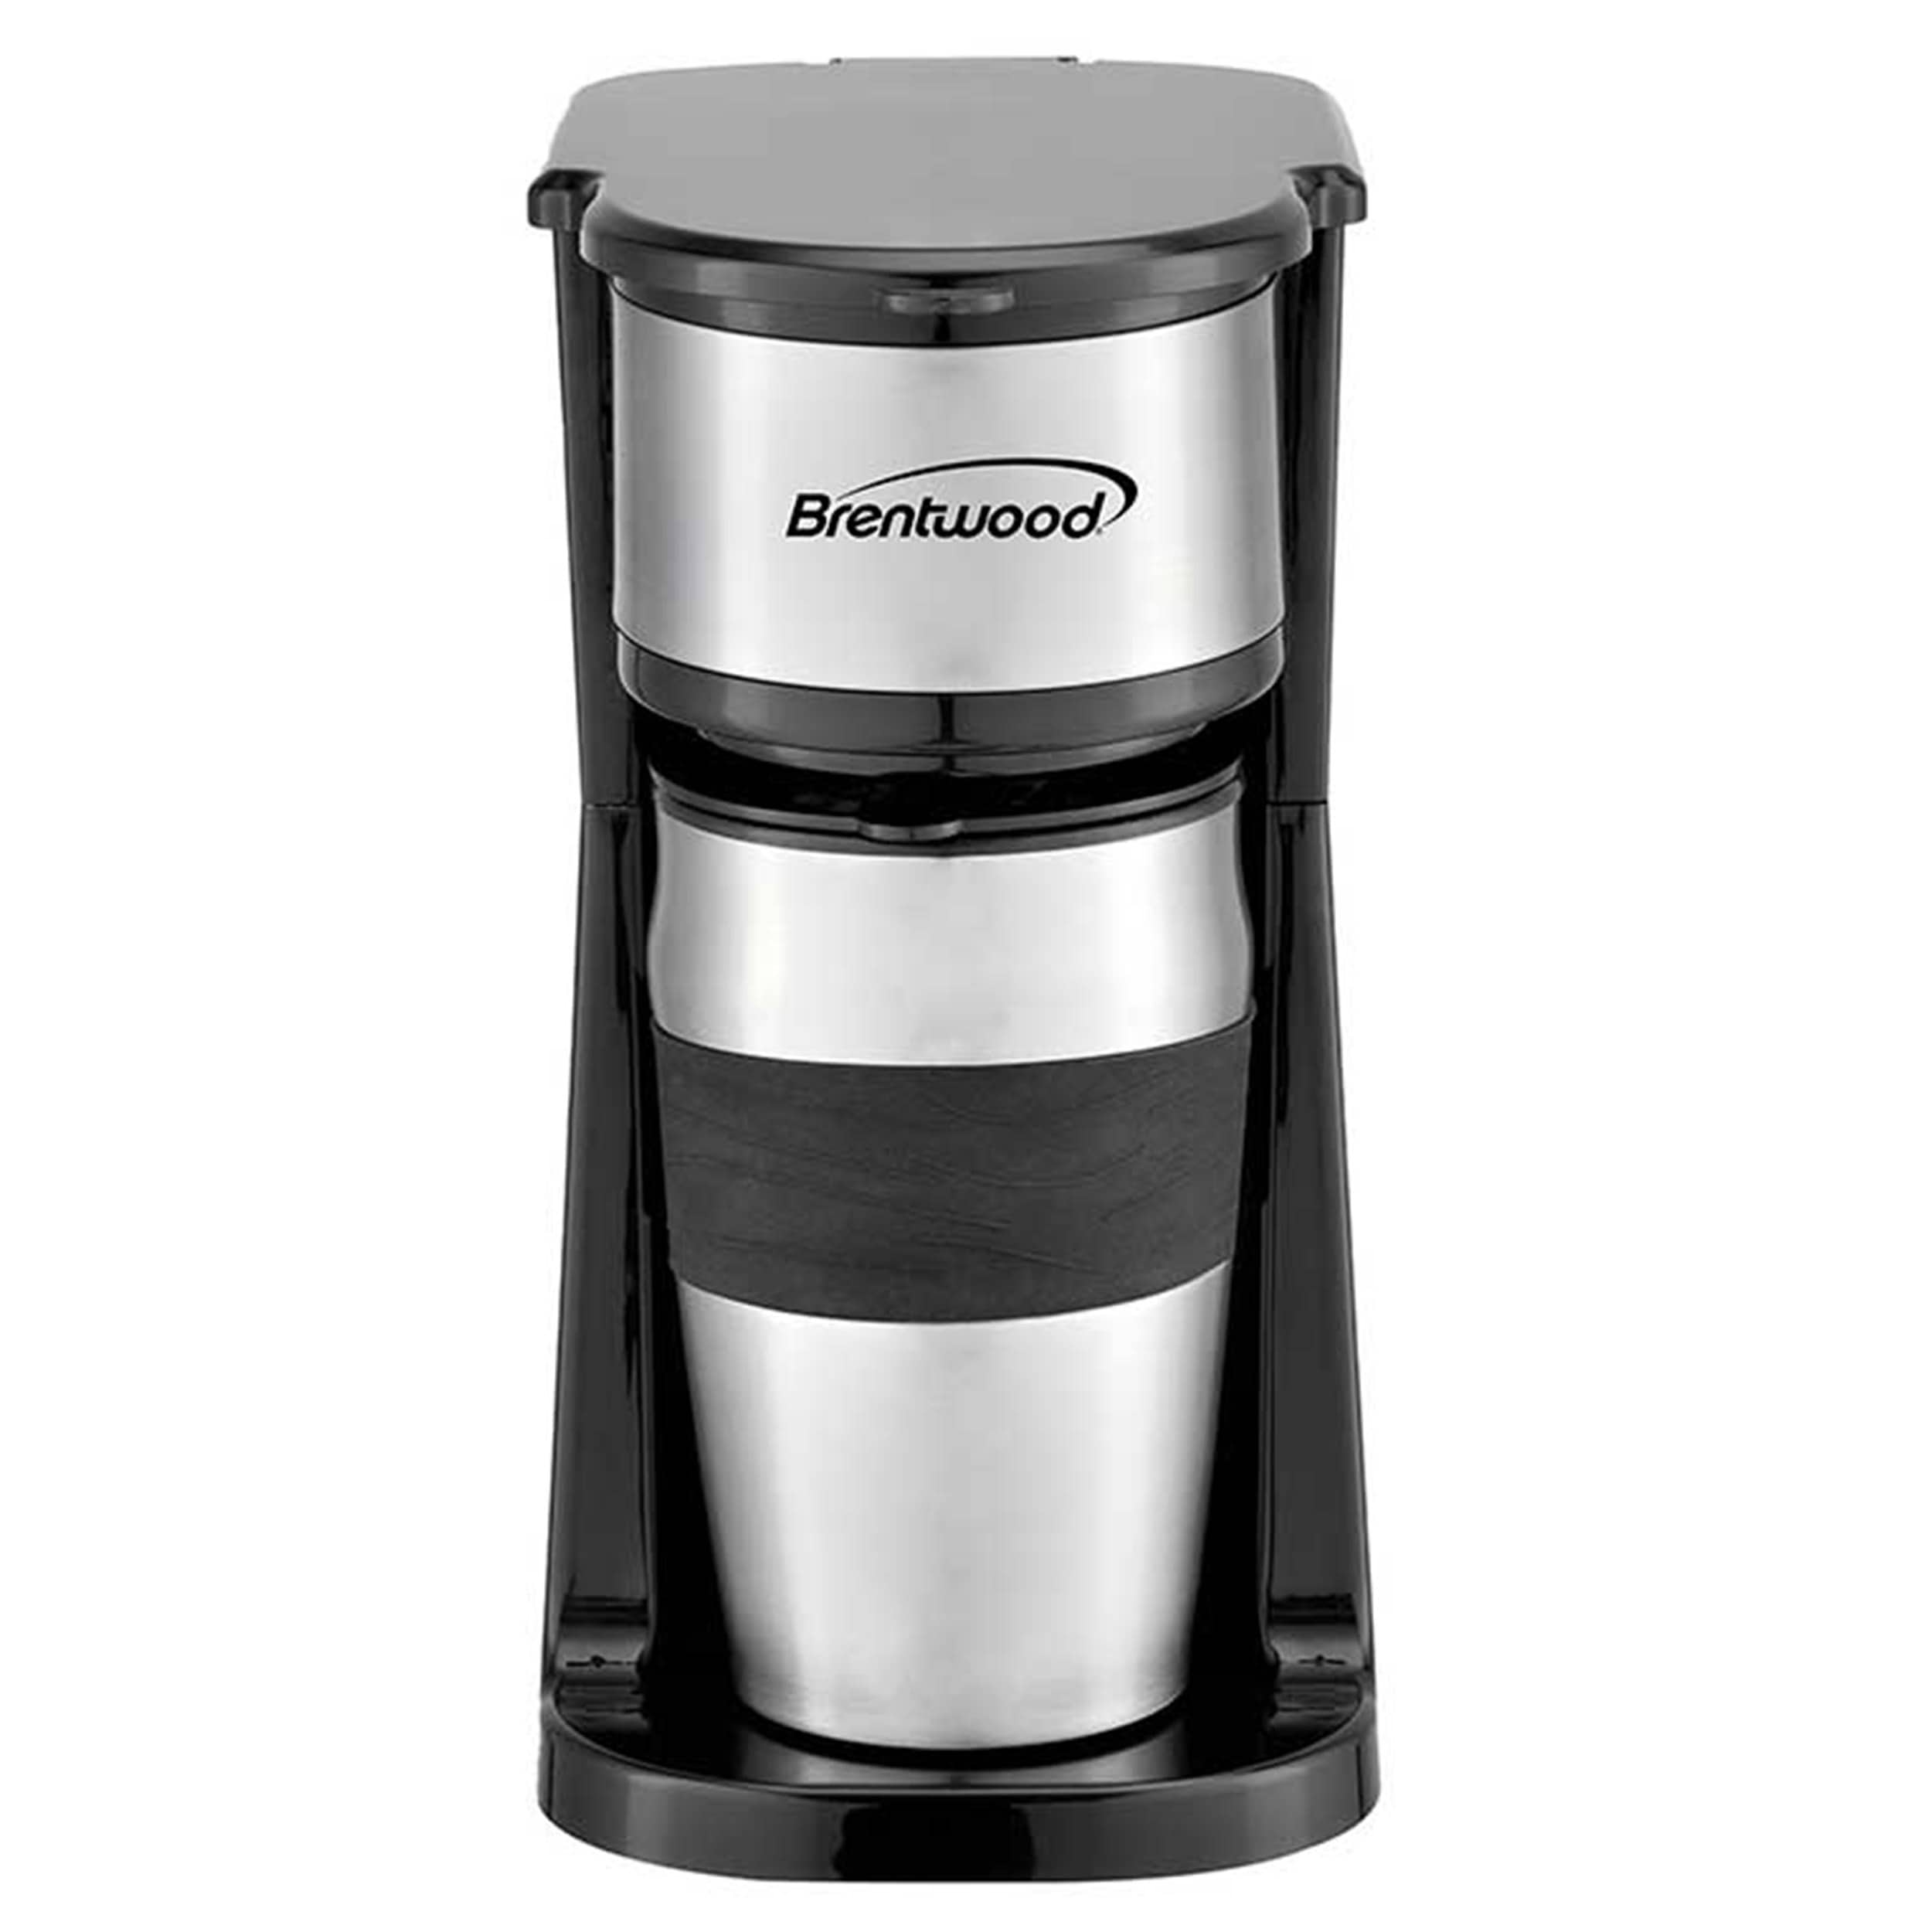 https://ak1.ostkcdn.com/images/products/is/images/direct/35aa90e378626f789930d377cbe6d35fa771a900/Brentwood-Portable-Single-Serve-Coffee-Maker-with-14oz-Travel-Mug-in-Black.jpg